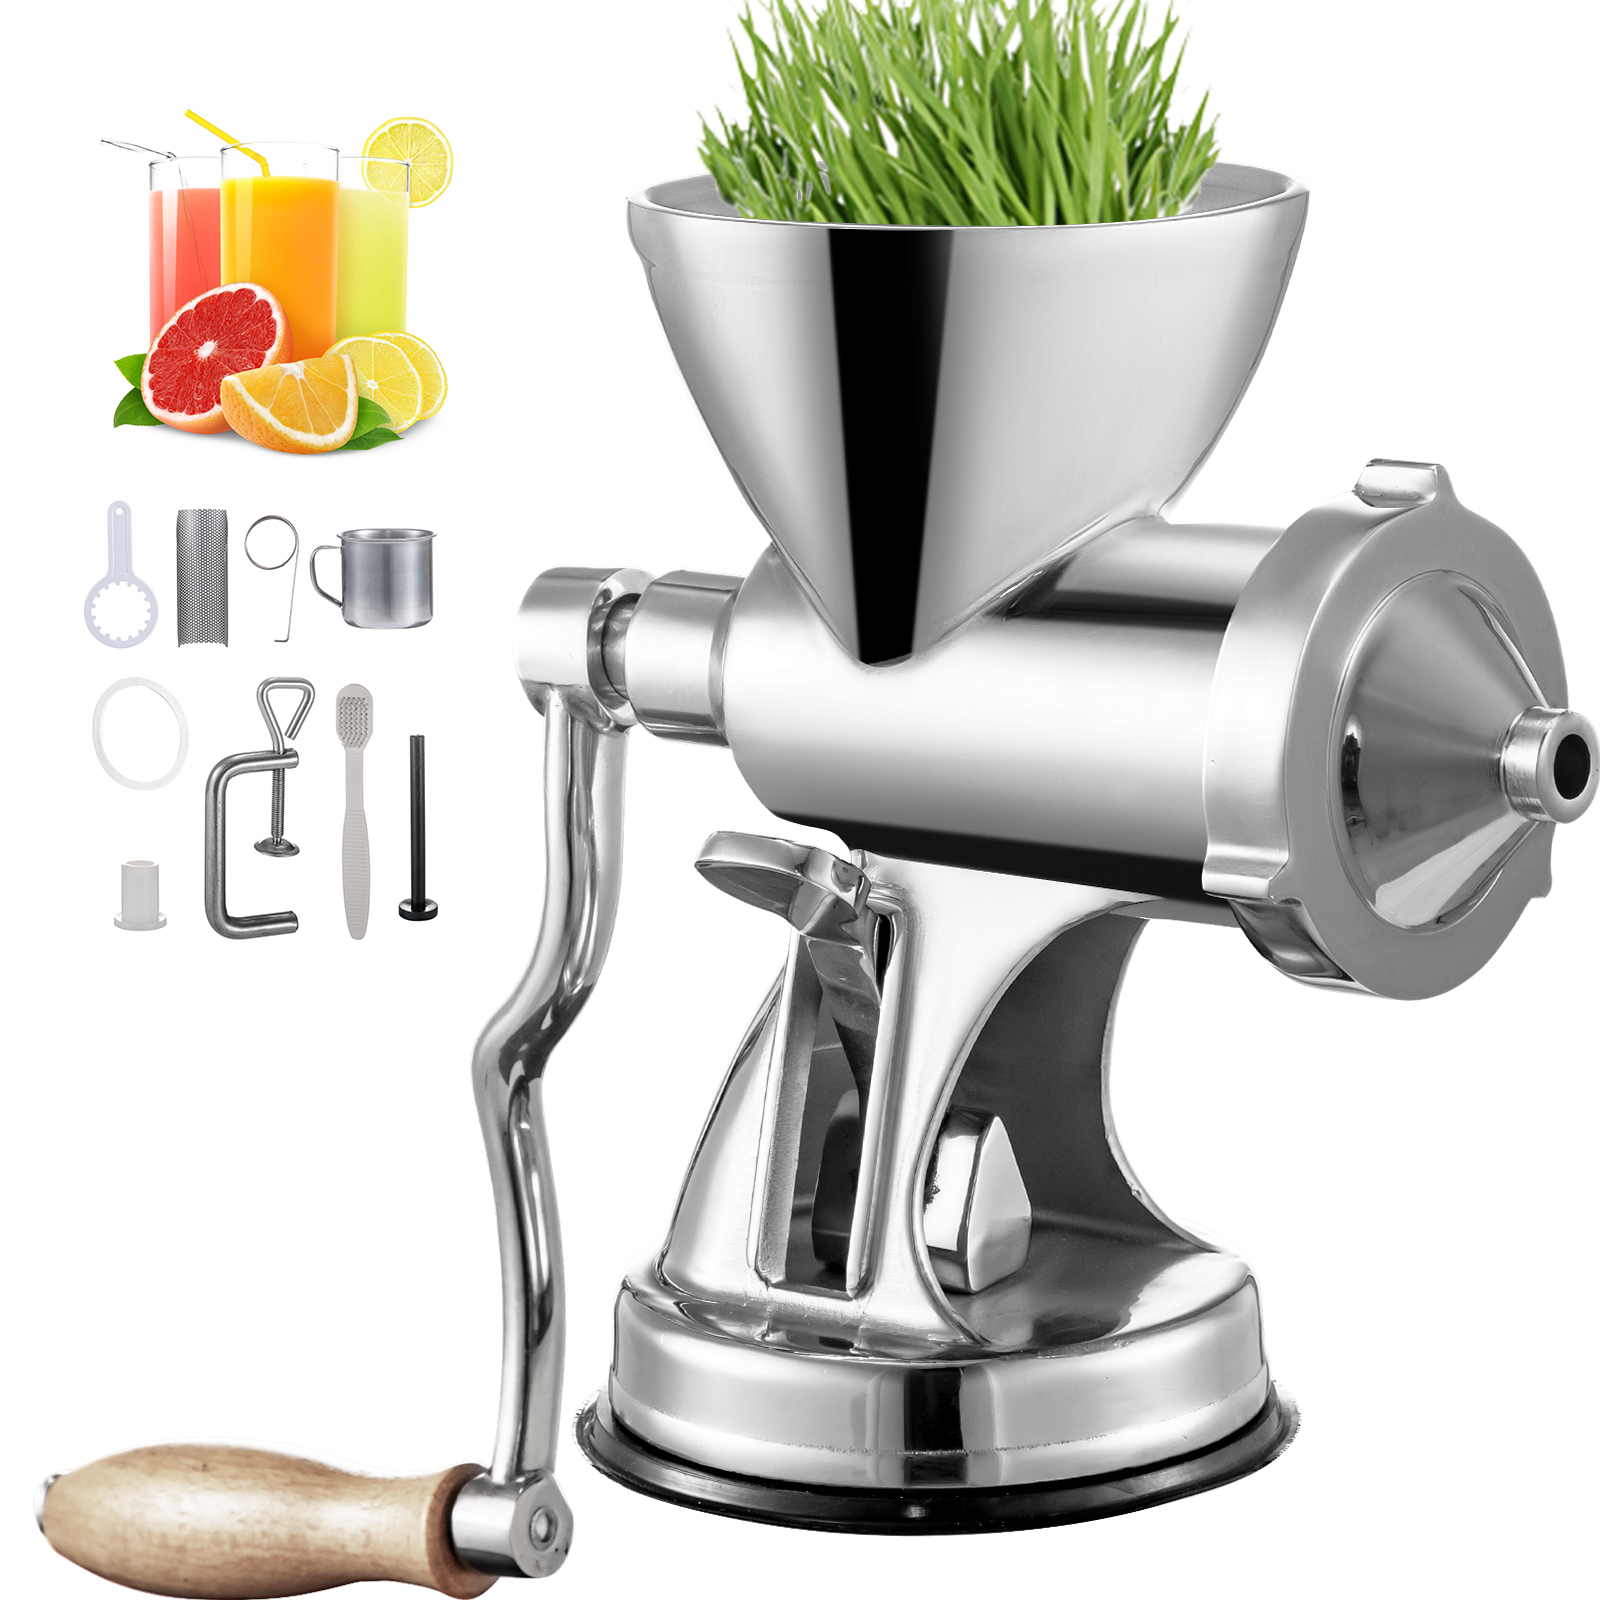 VEVOR Commercial Wheatgrass Juicing Machine, 80% Juice Yield, Slow  Masticating Juicer Extractor with 100W 75RPM Quiet Motor, Stainless Steel  Portable Cold Press with Reverse Function Pusher Cup Brush